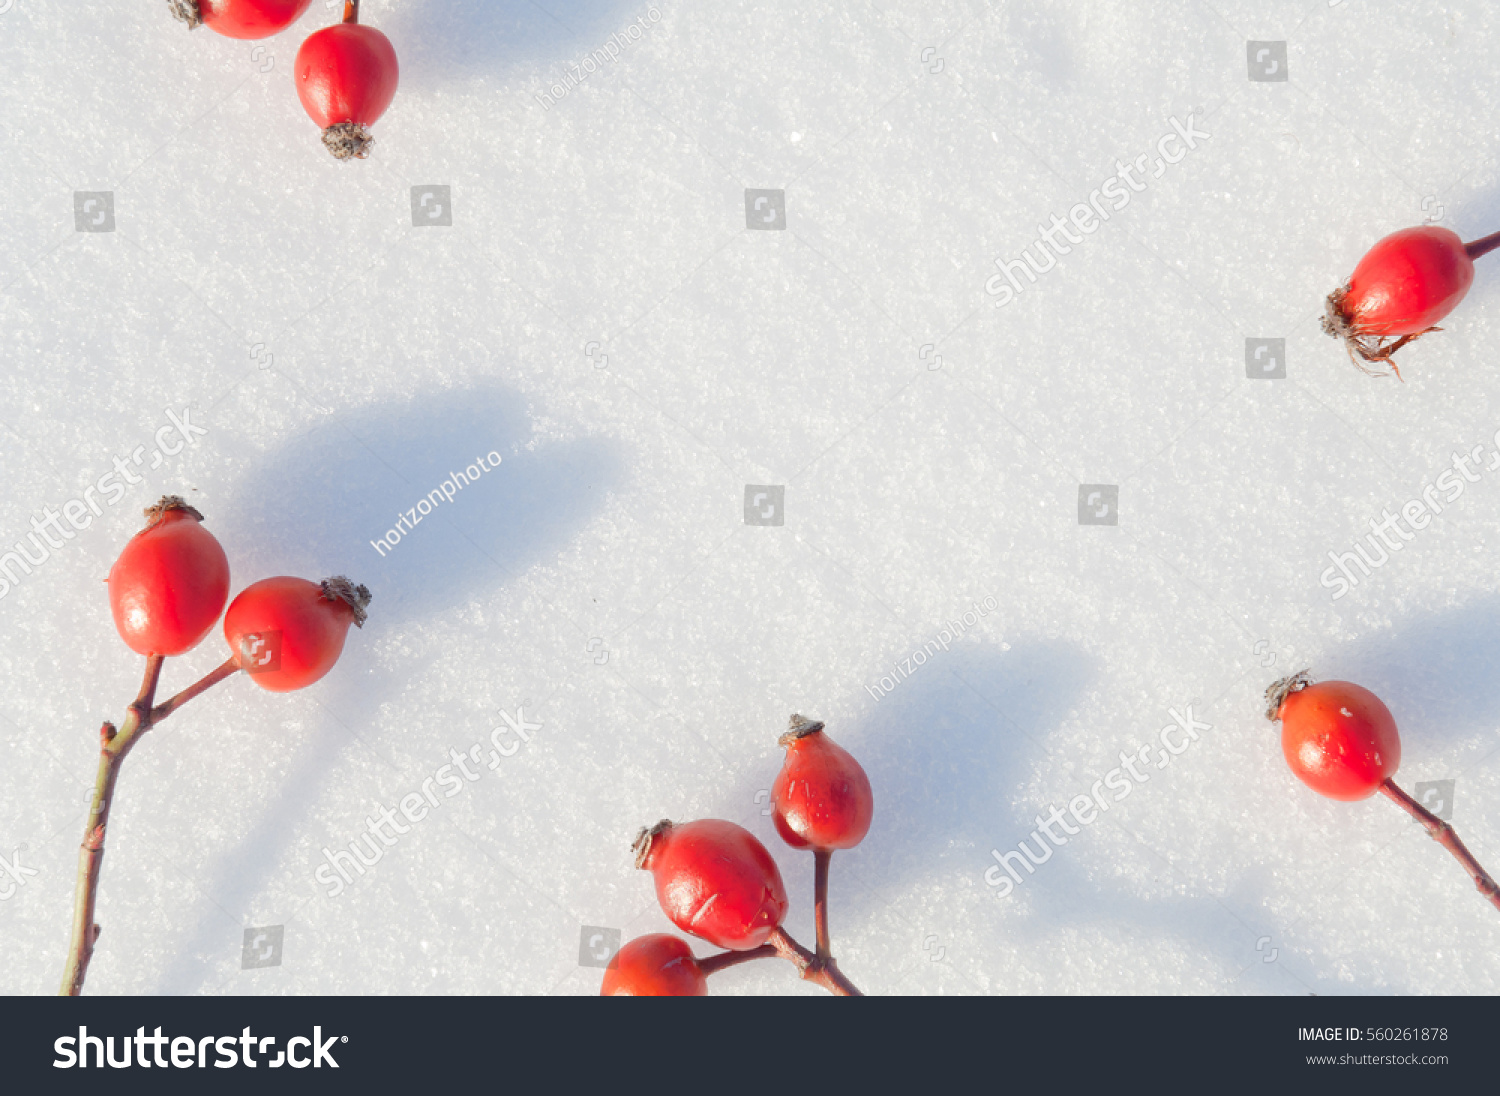 Winter snow background decorated with rose hip berries arranged red berries on snow #560261878